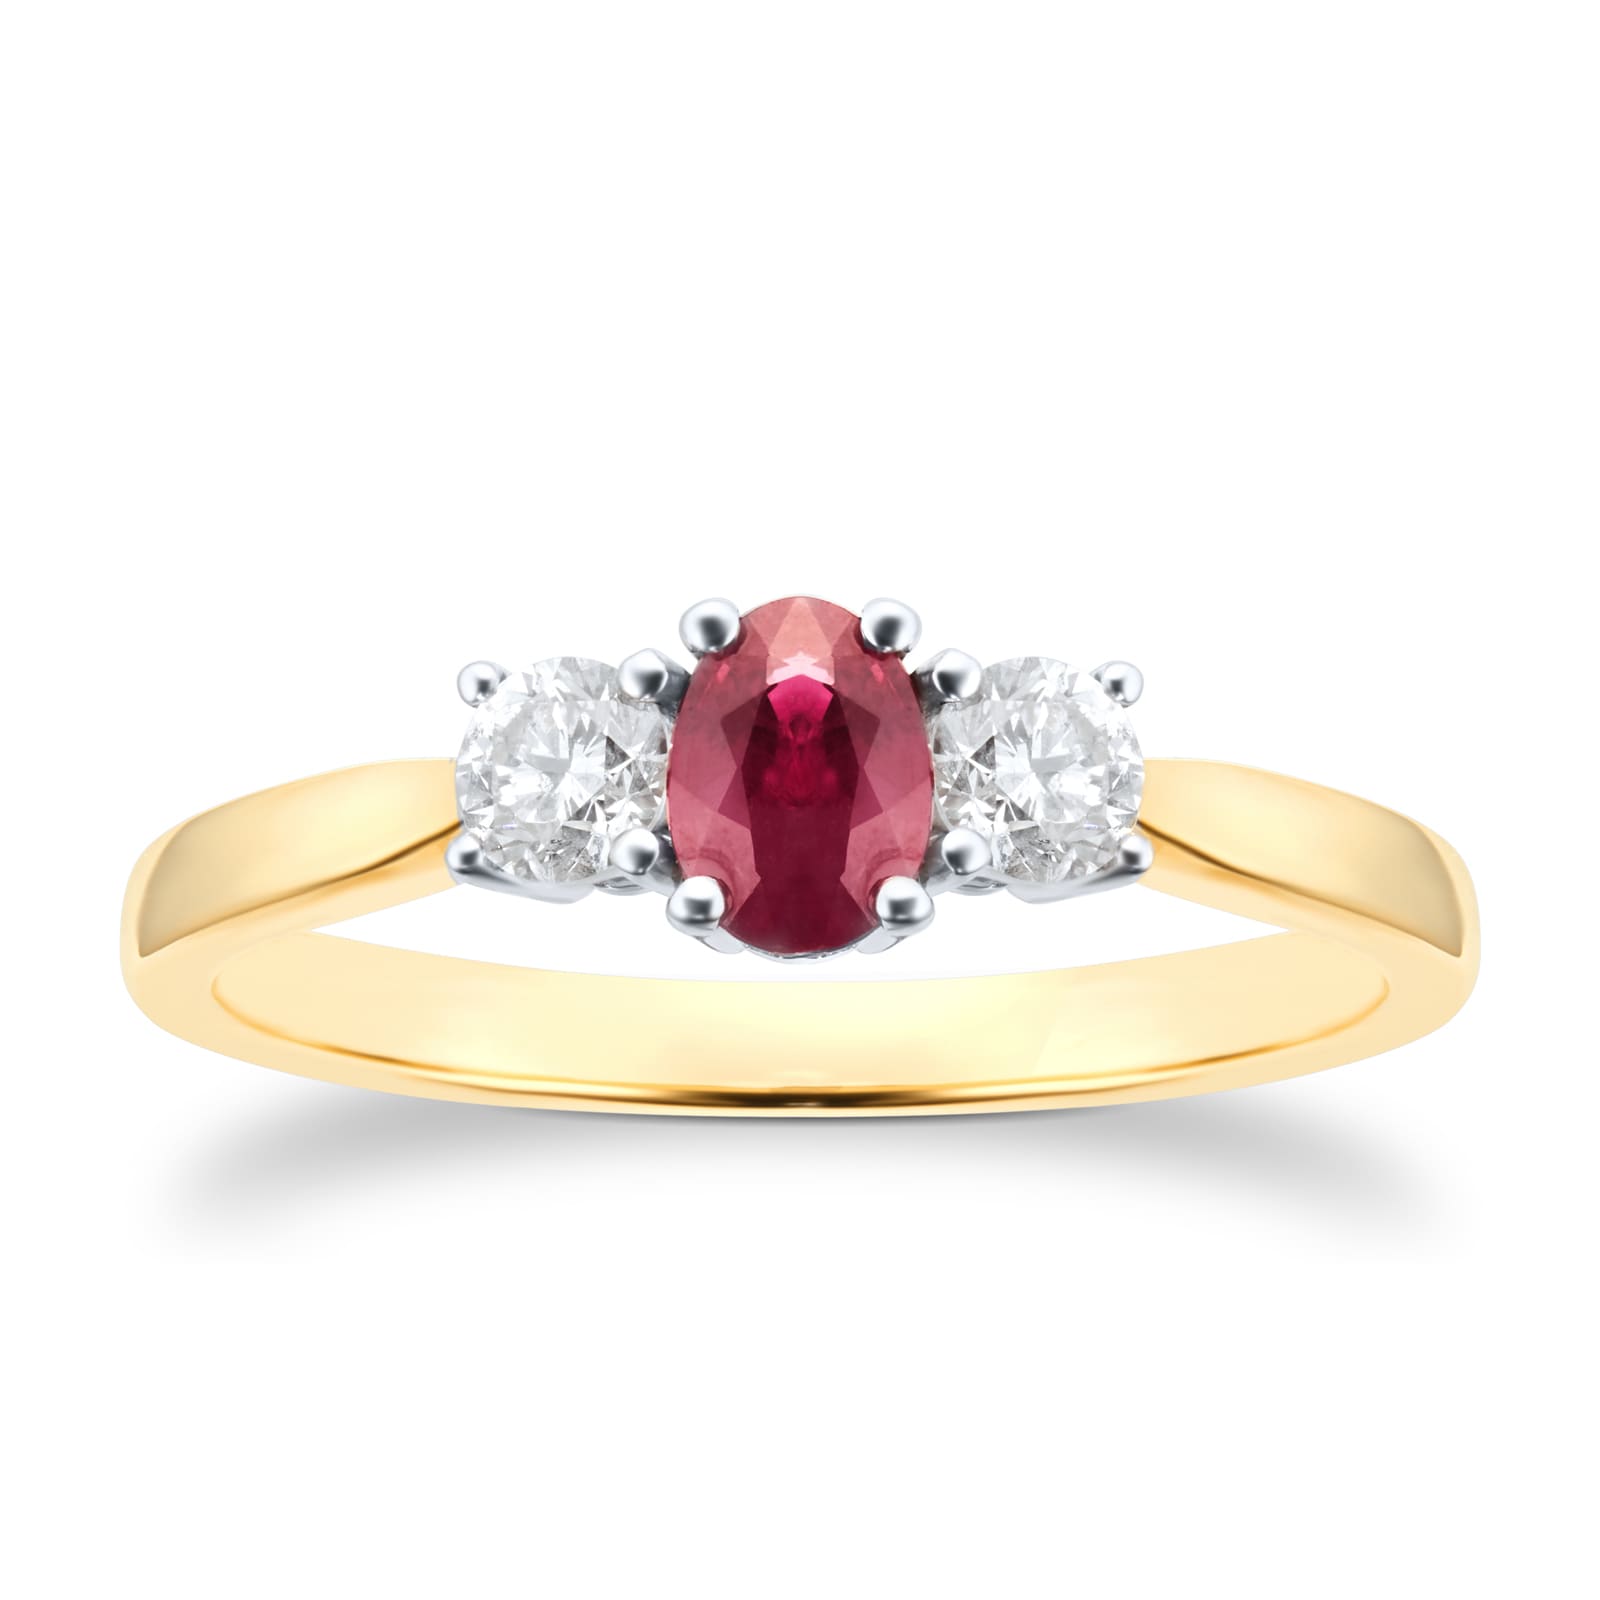 9ct Yellow and White Gold 3 Stone Ruby & Diamond Ring - Ring Size L.5